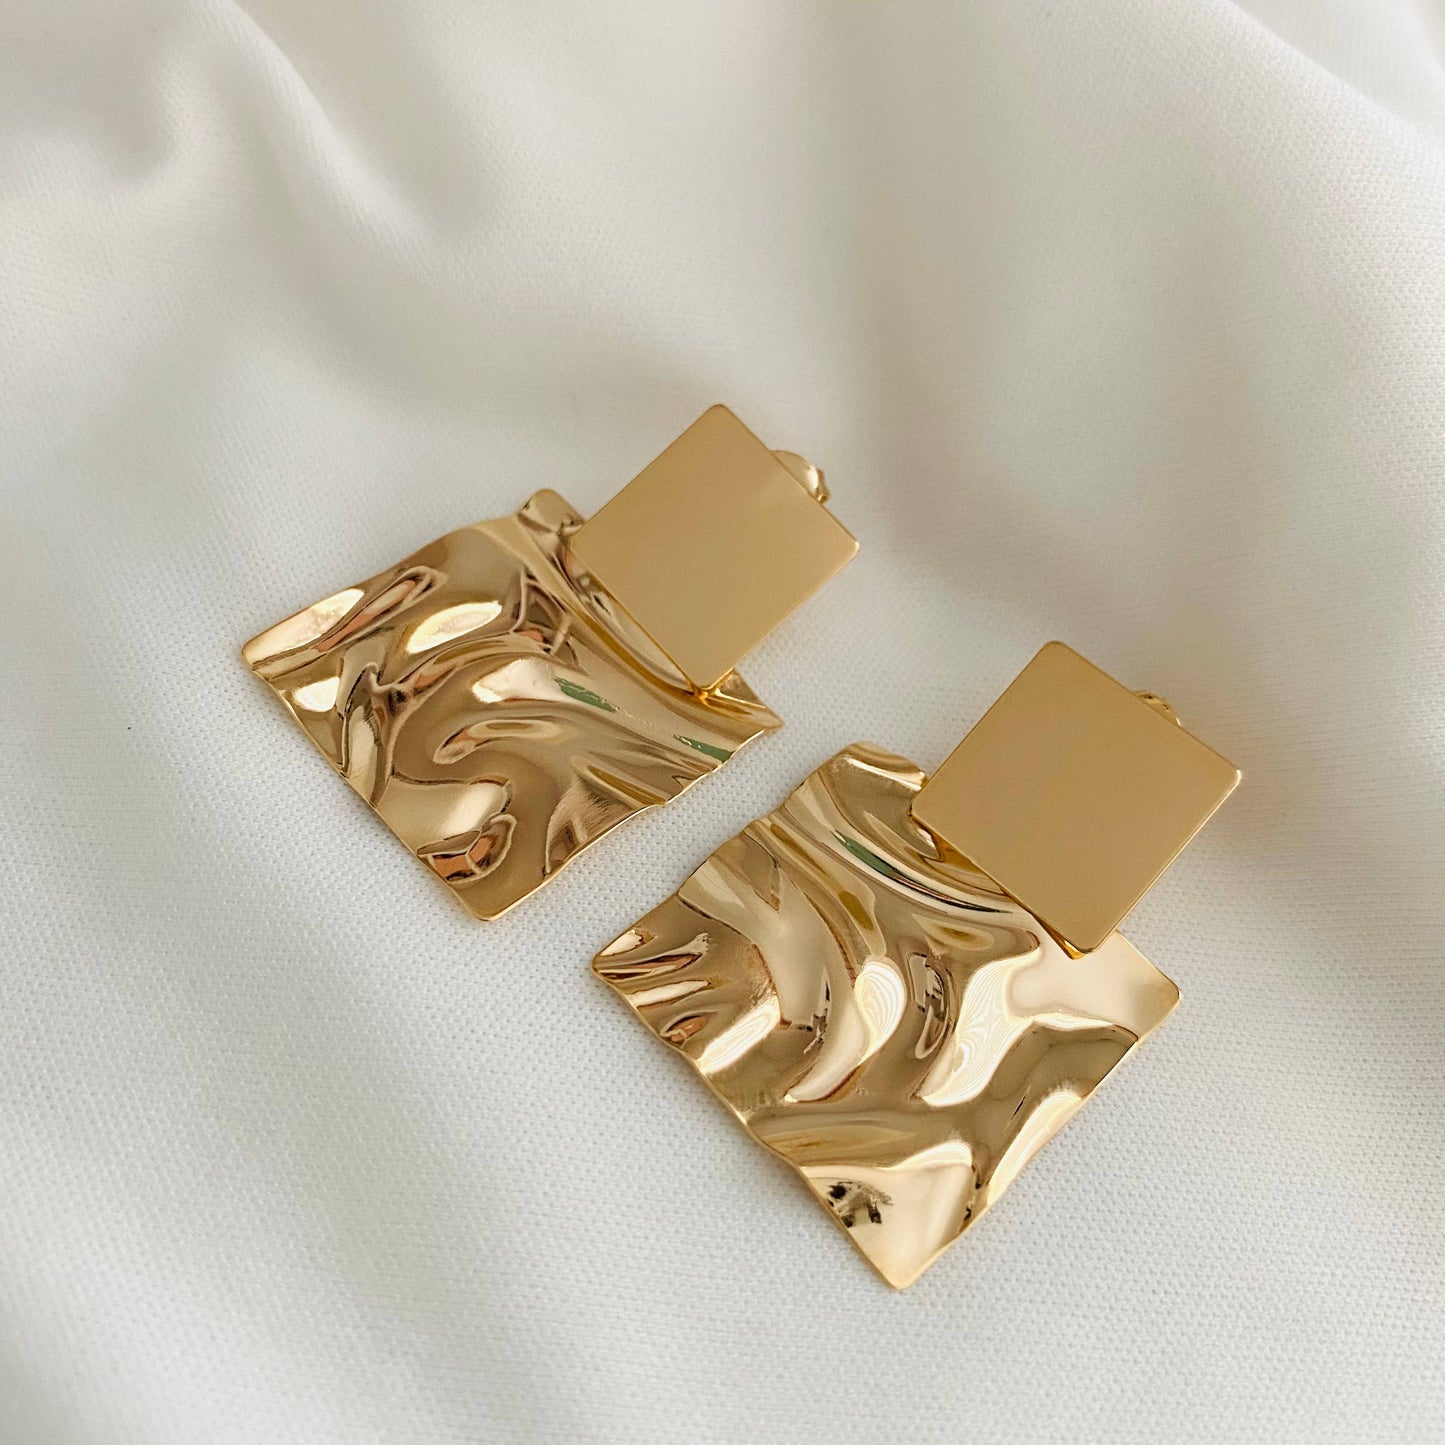 a pair of gold earrings on a white cloth